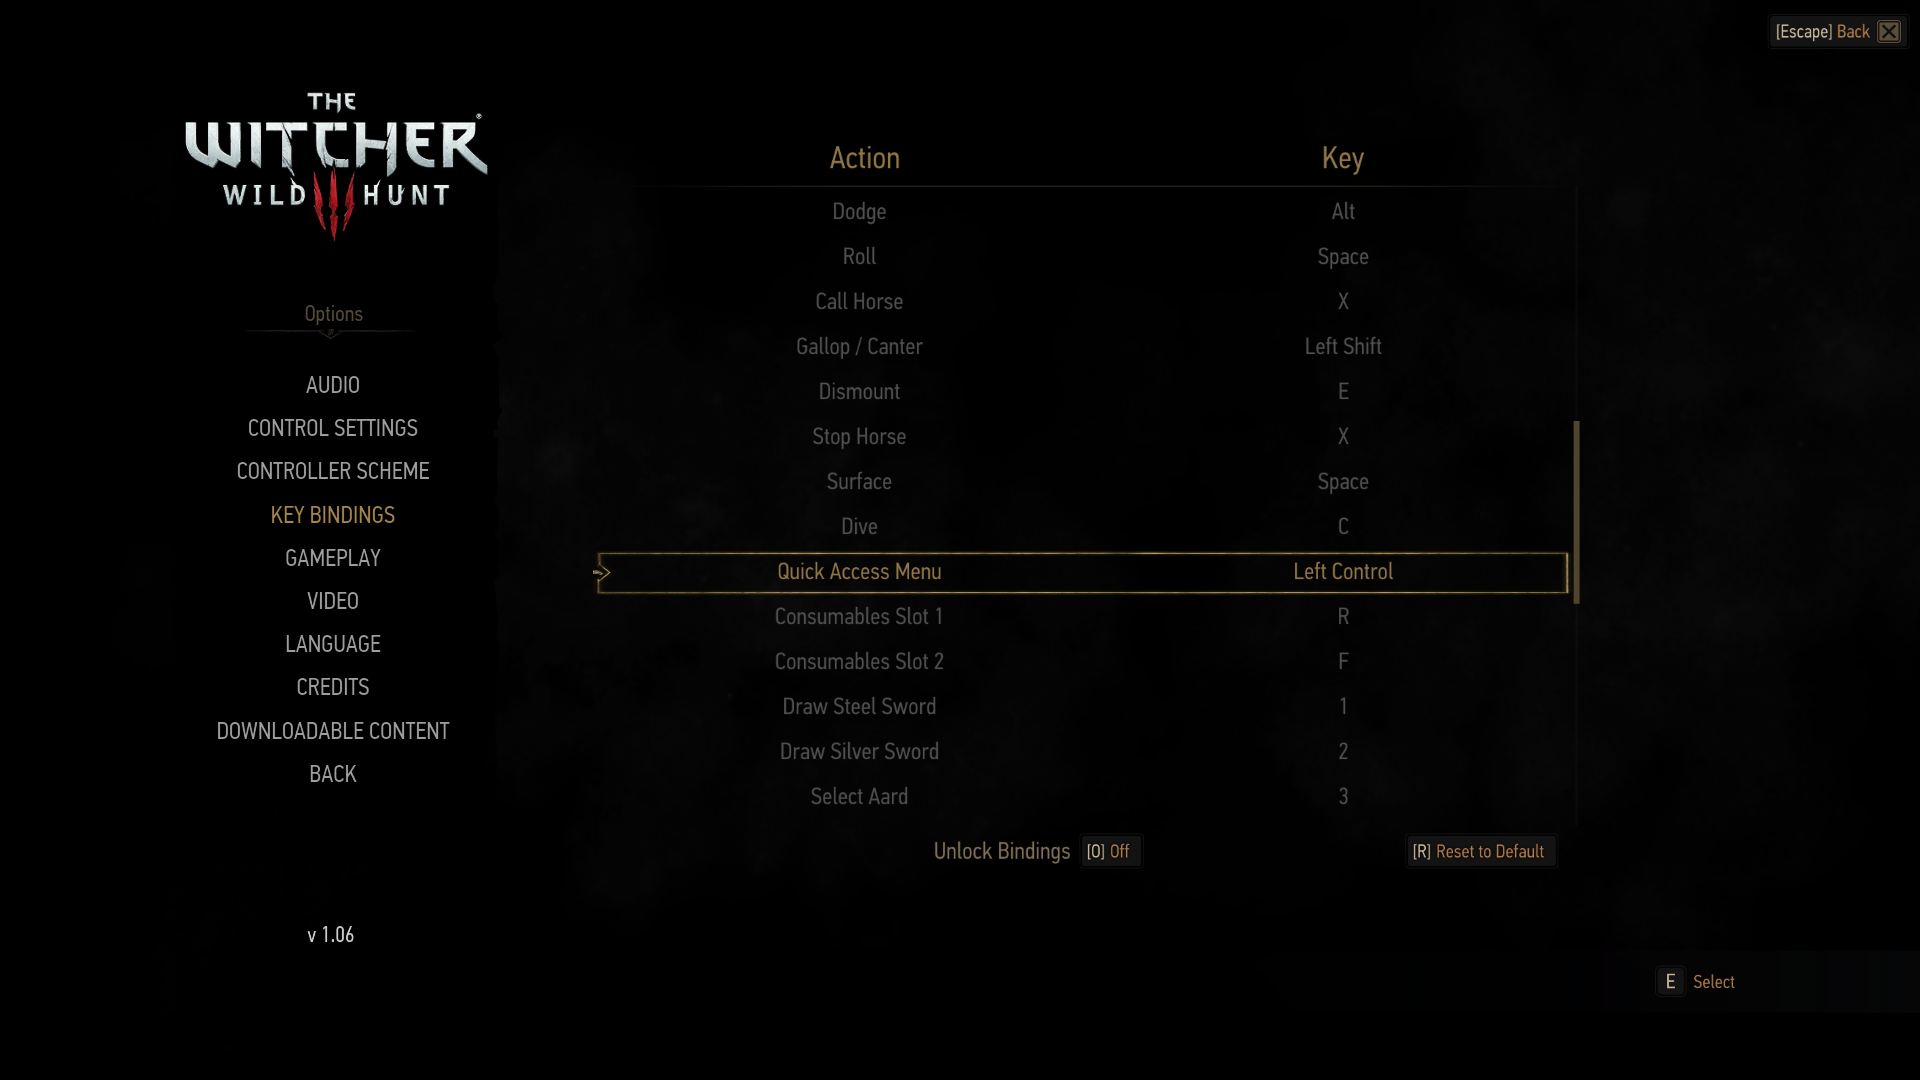 Witcher 3 mods.settings file cabinet